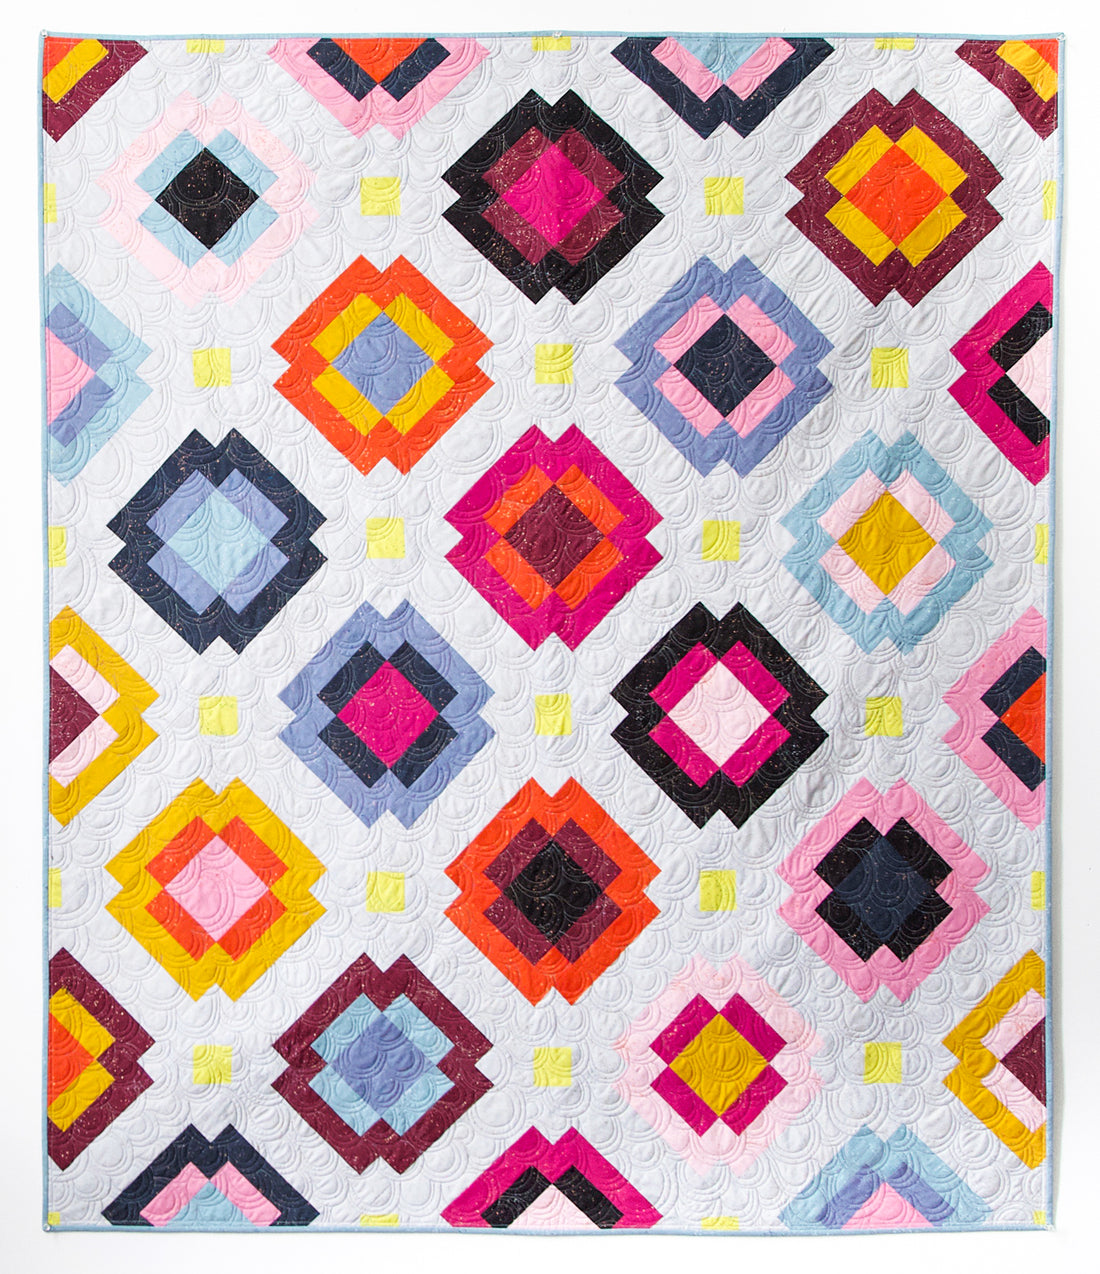 Radiate Quilt - The Ruby Star Society One